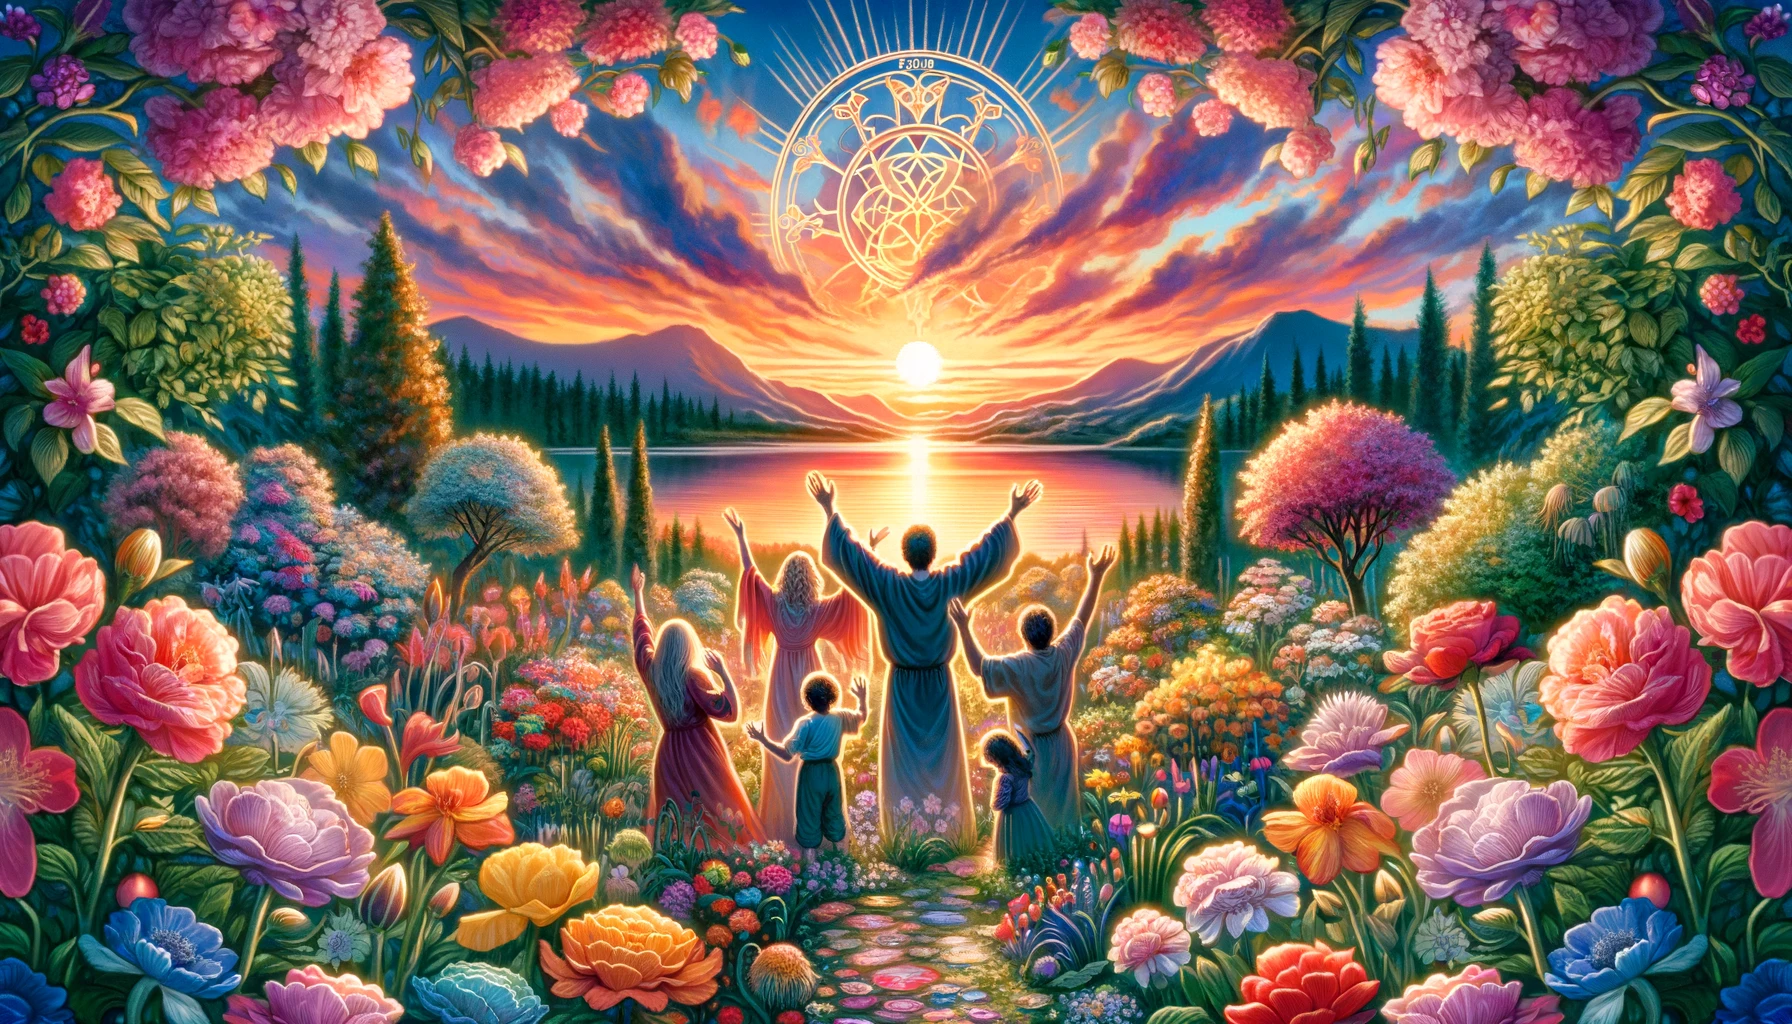 An image depicting a vibrant sunset over a serene lake with a happy family rejoicing arms raised surrounded by a lush garden of blooming flowers. T